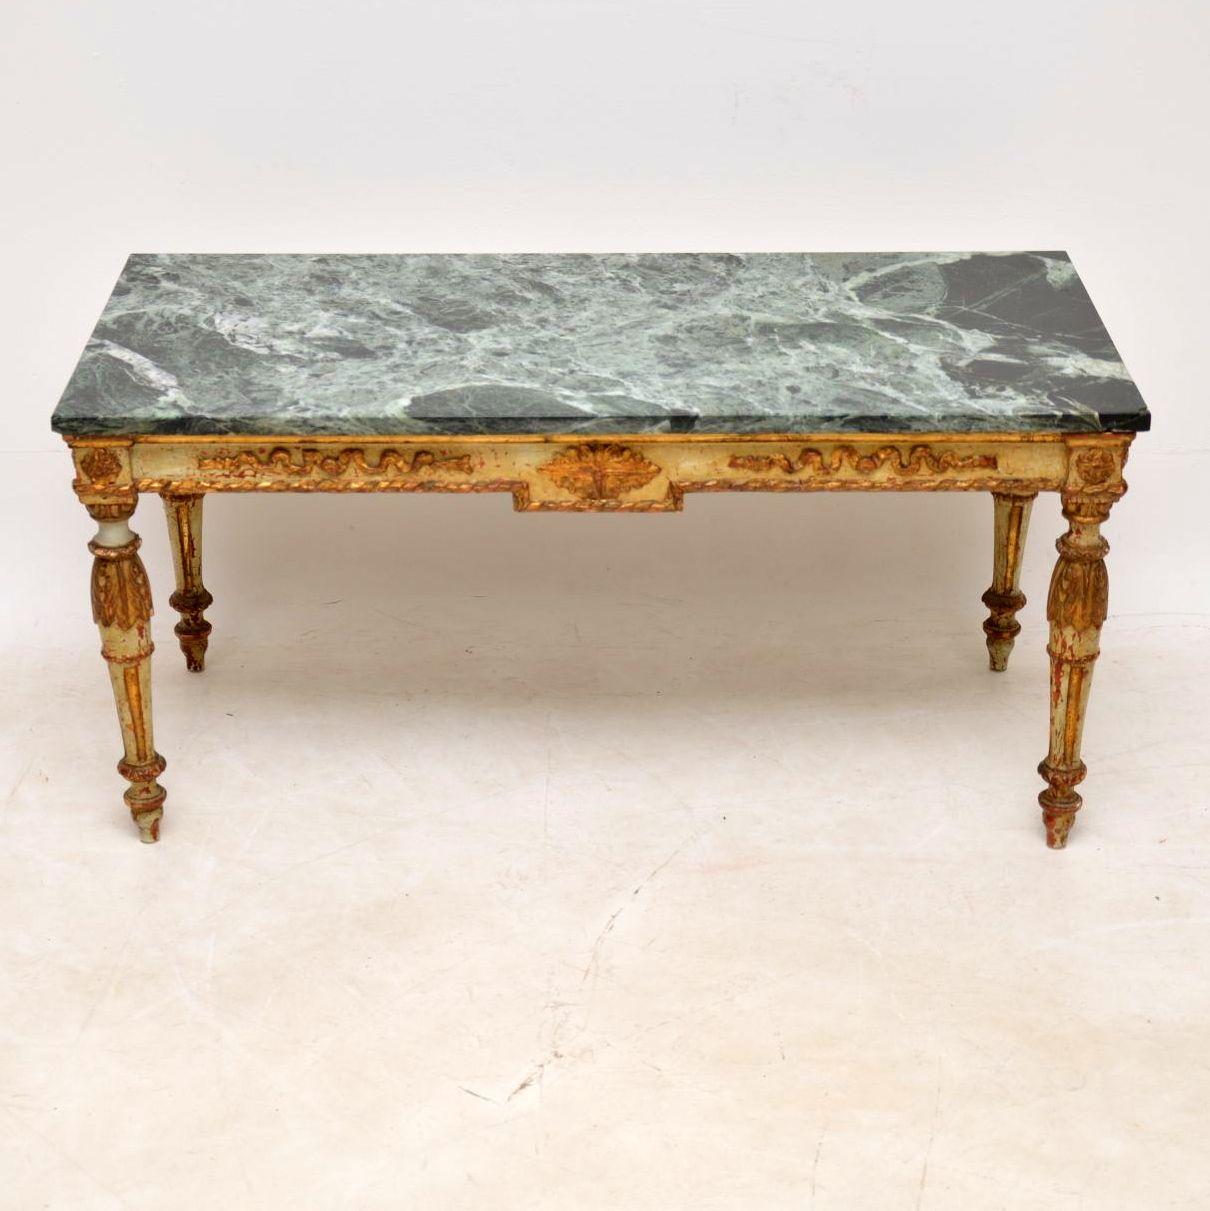 This antique French marble-top coffee table has the original painted finish and is naturally distressed with loads of character. You can see the original reddish under layer showing in places beneath the paintwork which is embellished with gilt work